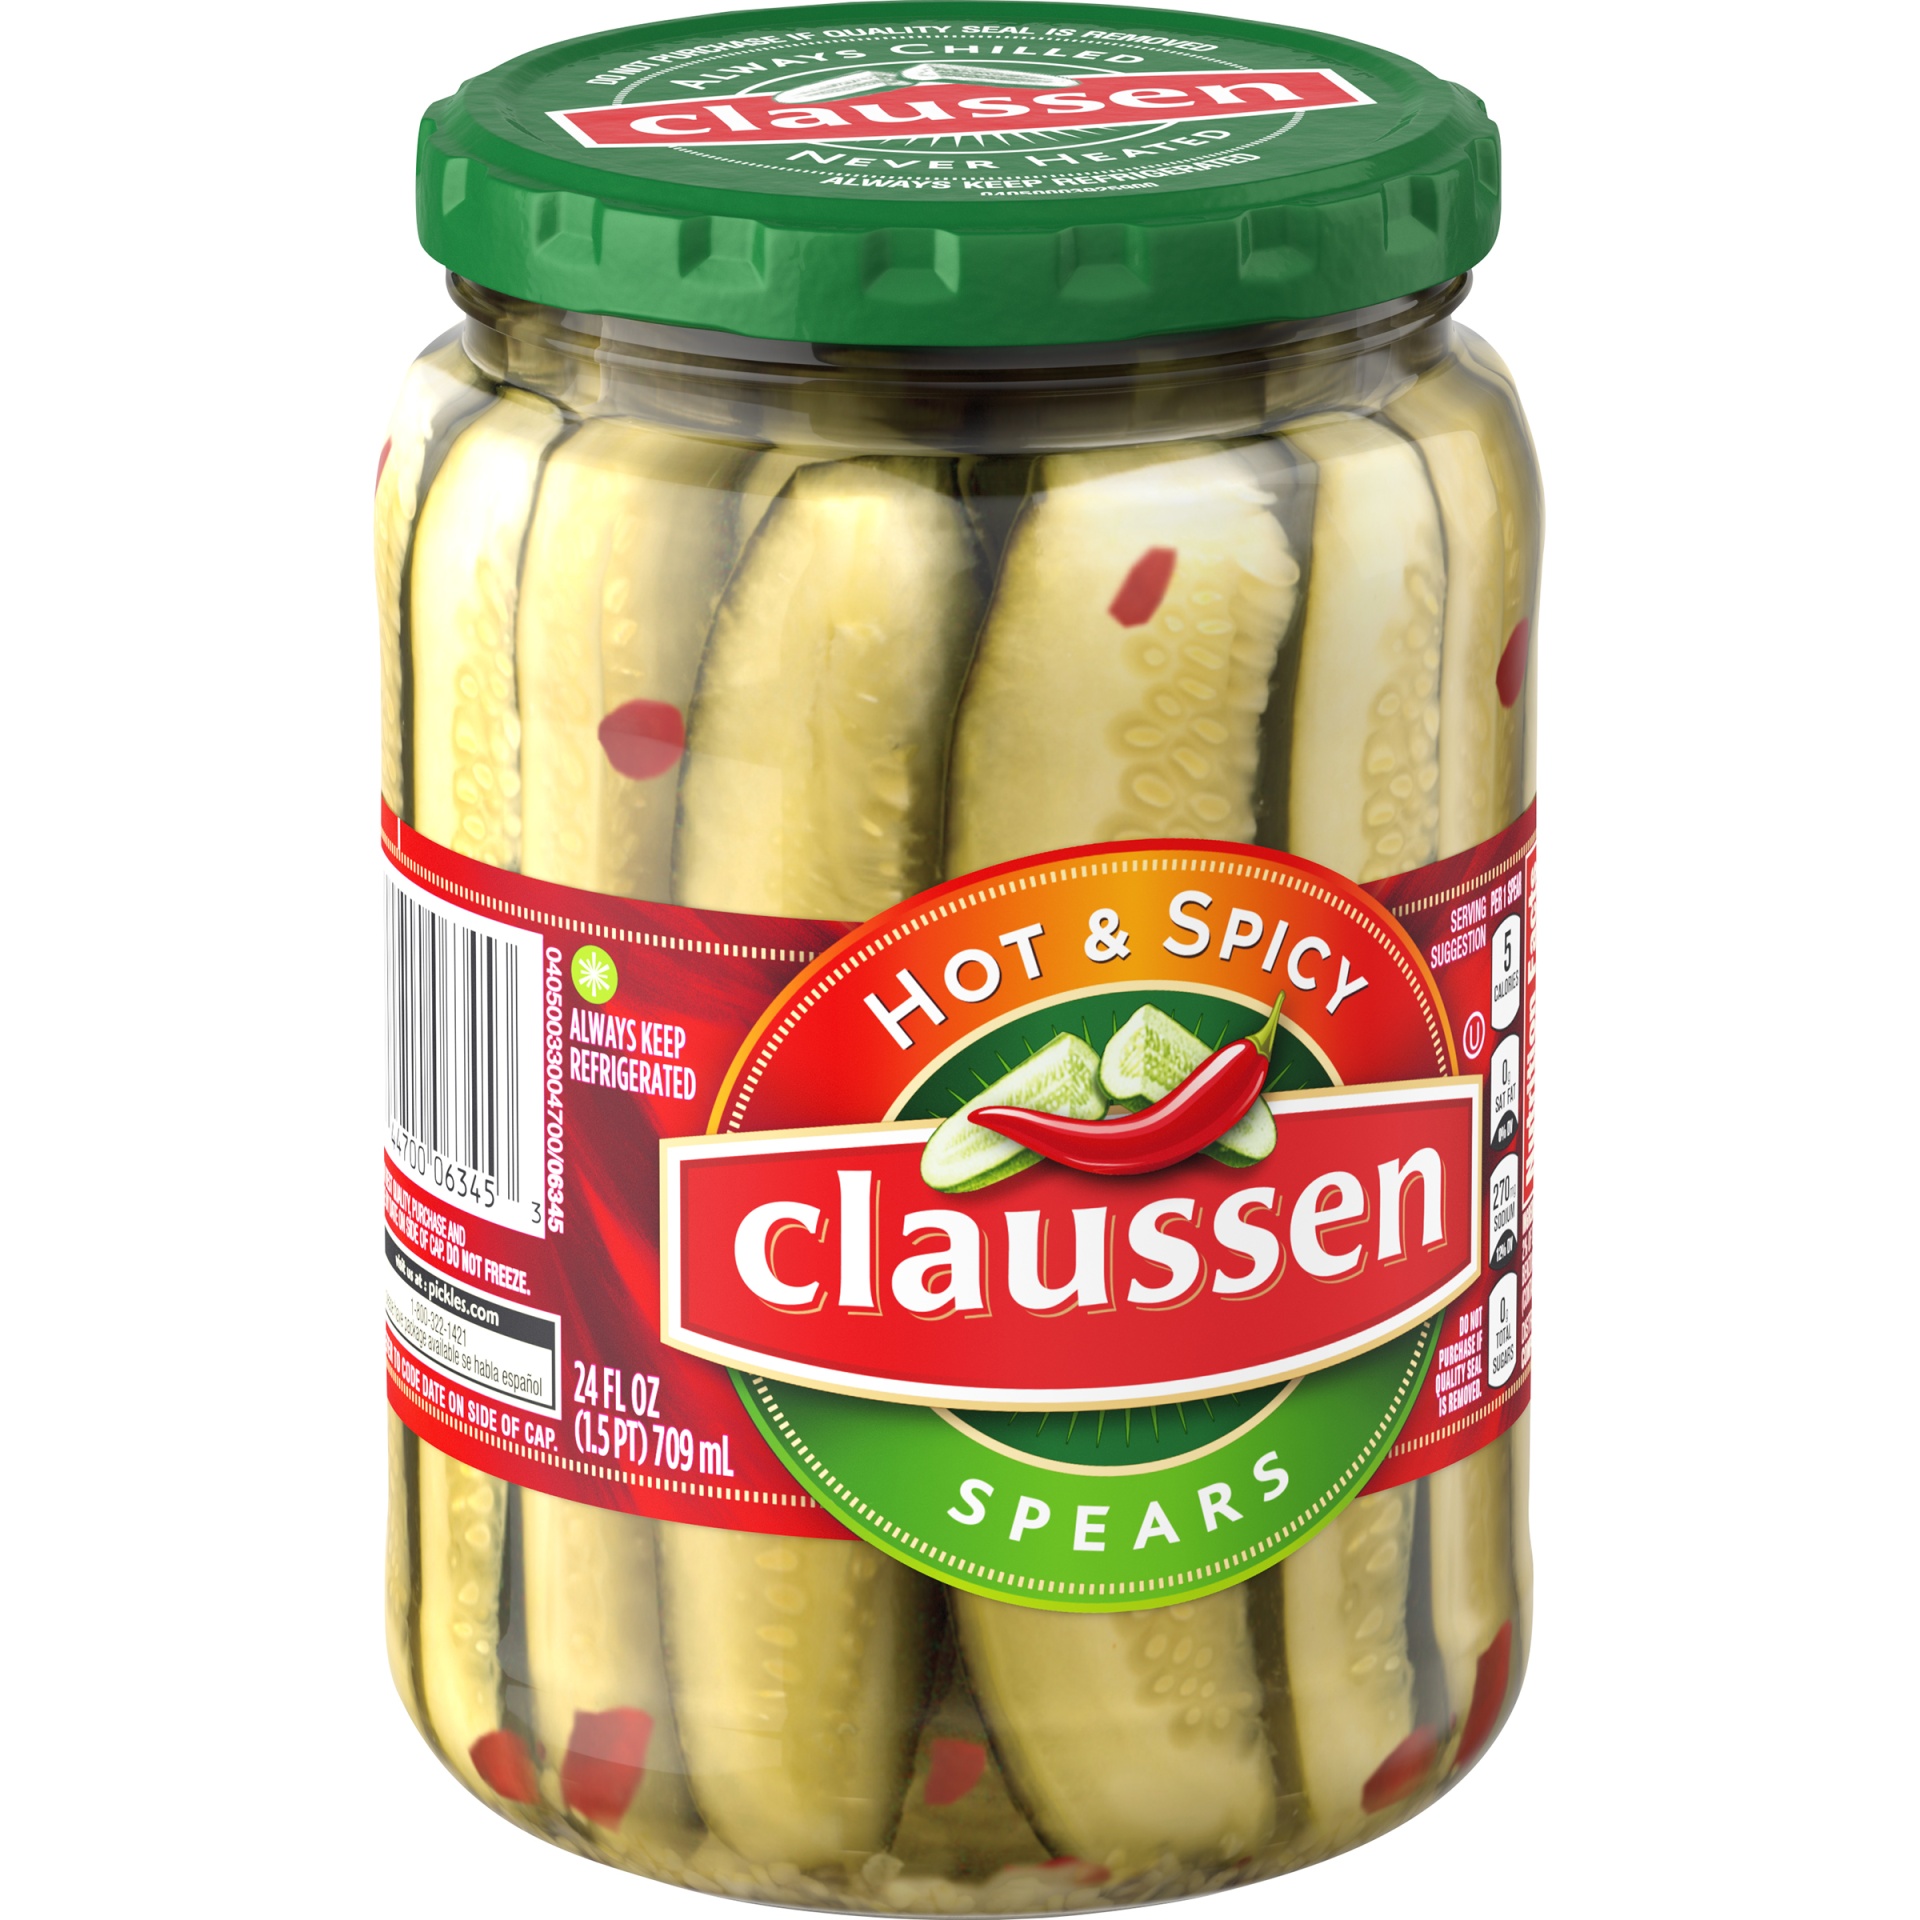 Claussen Hot & Spicy Pickle Spears 24 oz Shipt